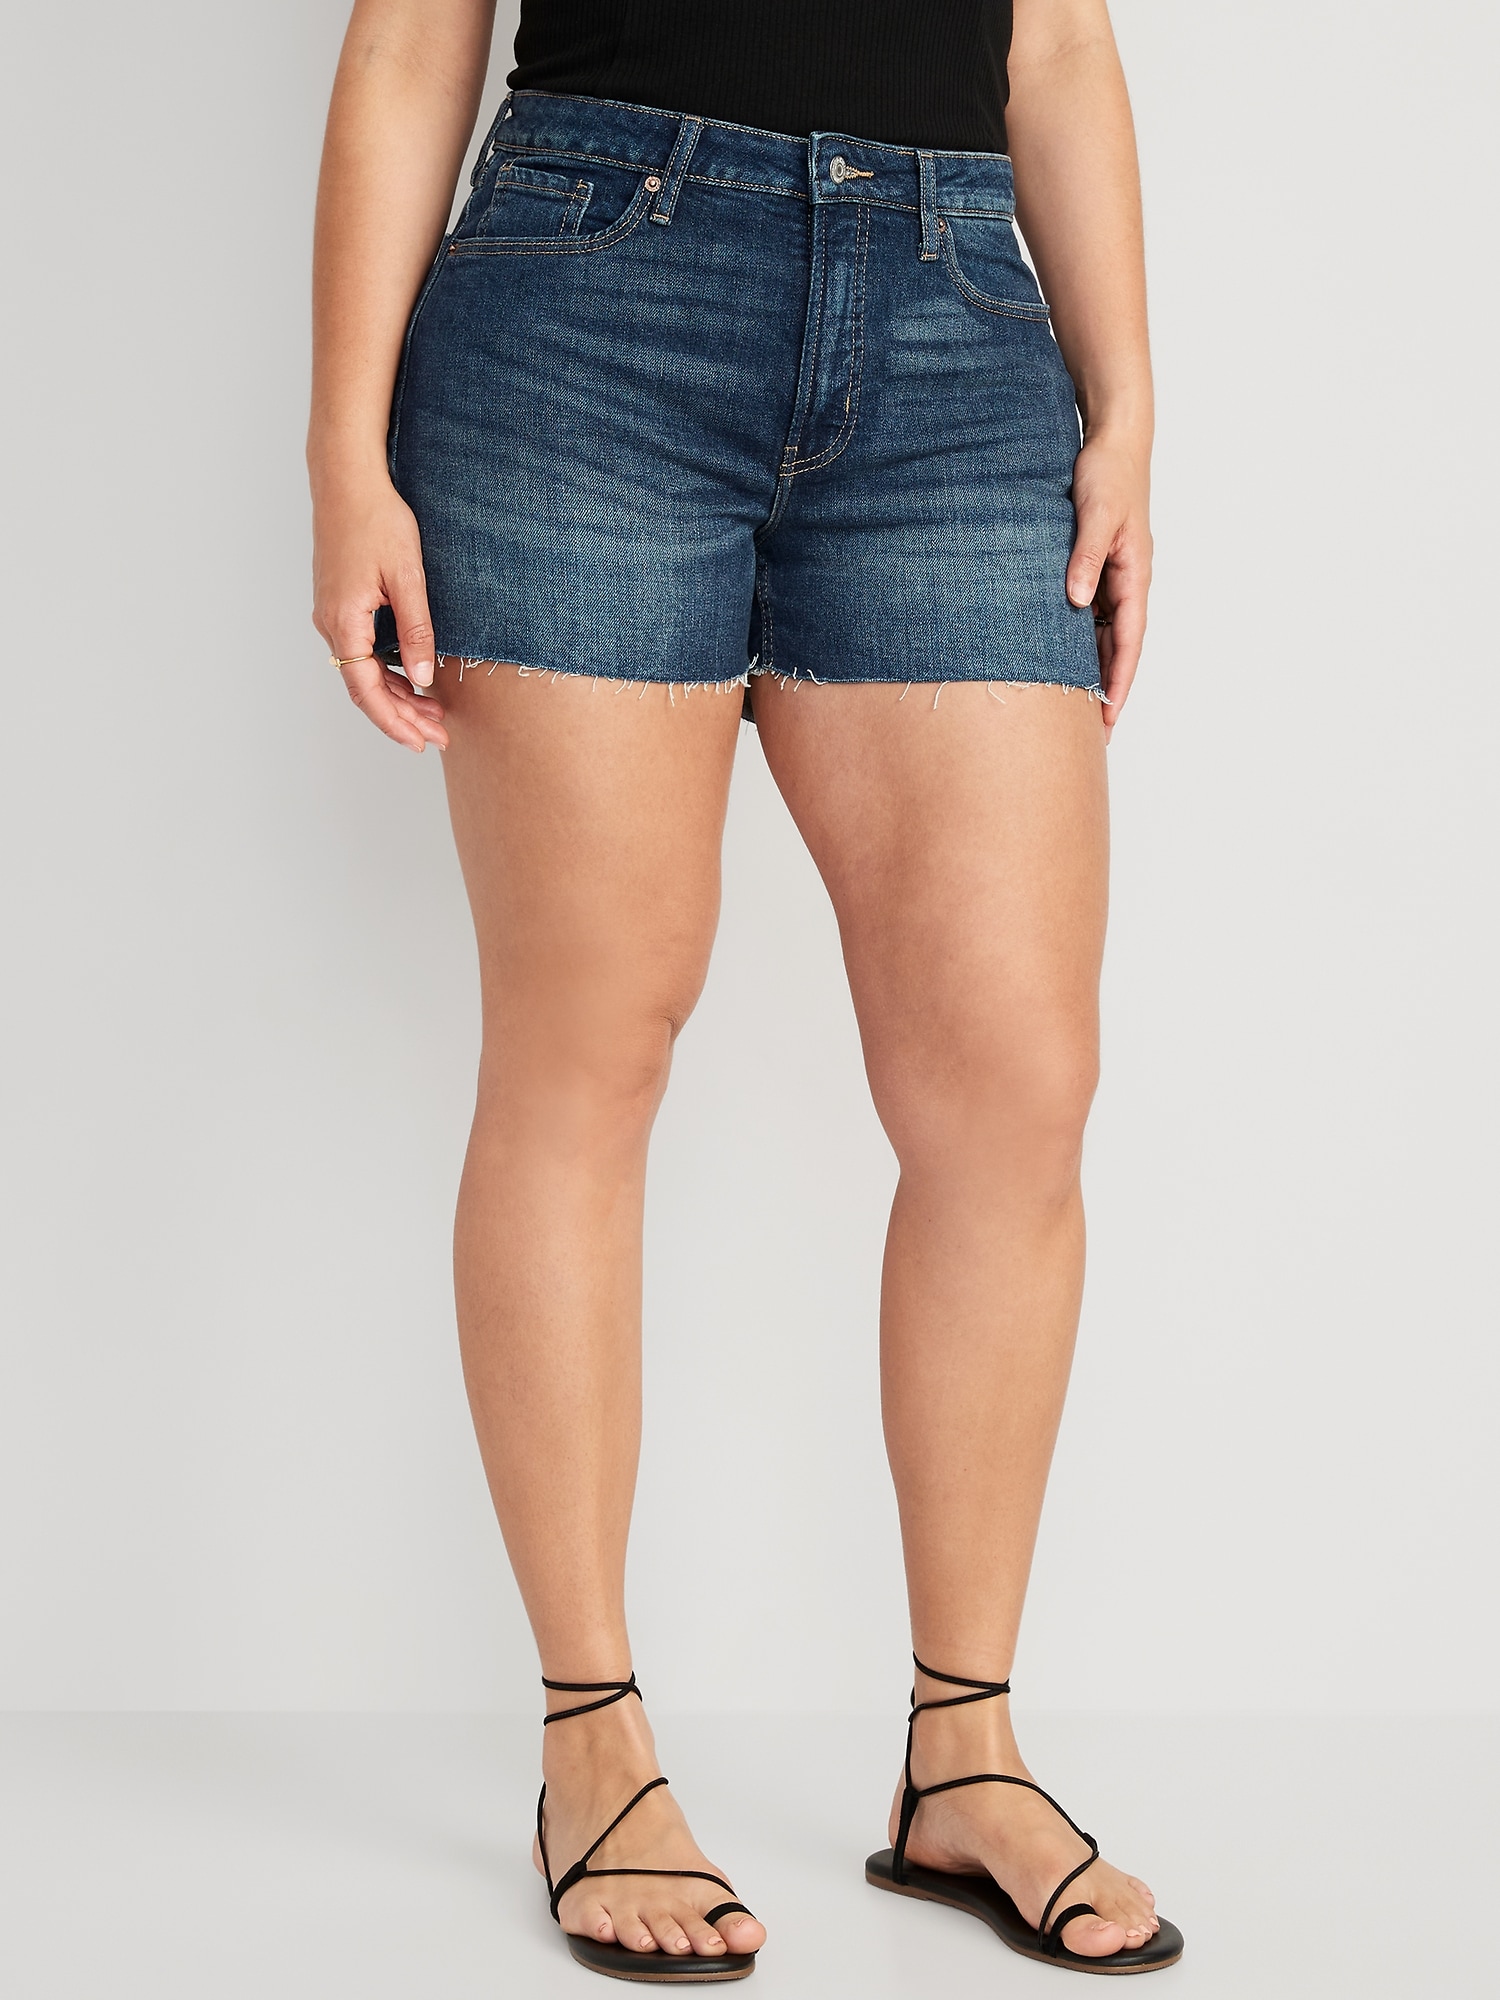 High-Waisted OG Straight Cut-Off Jean Shorts for Women -- 3-inch inseam